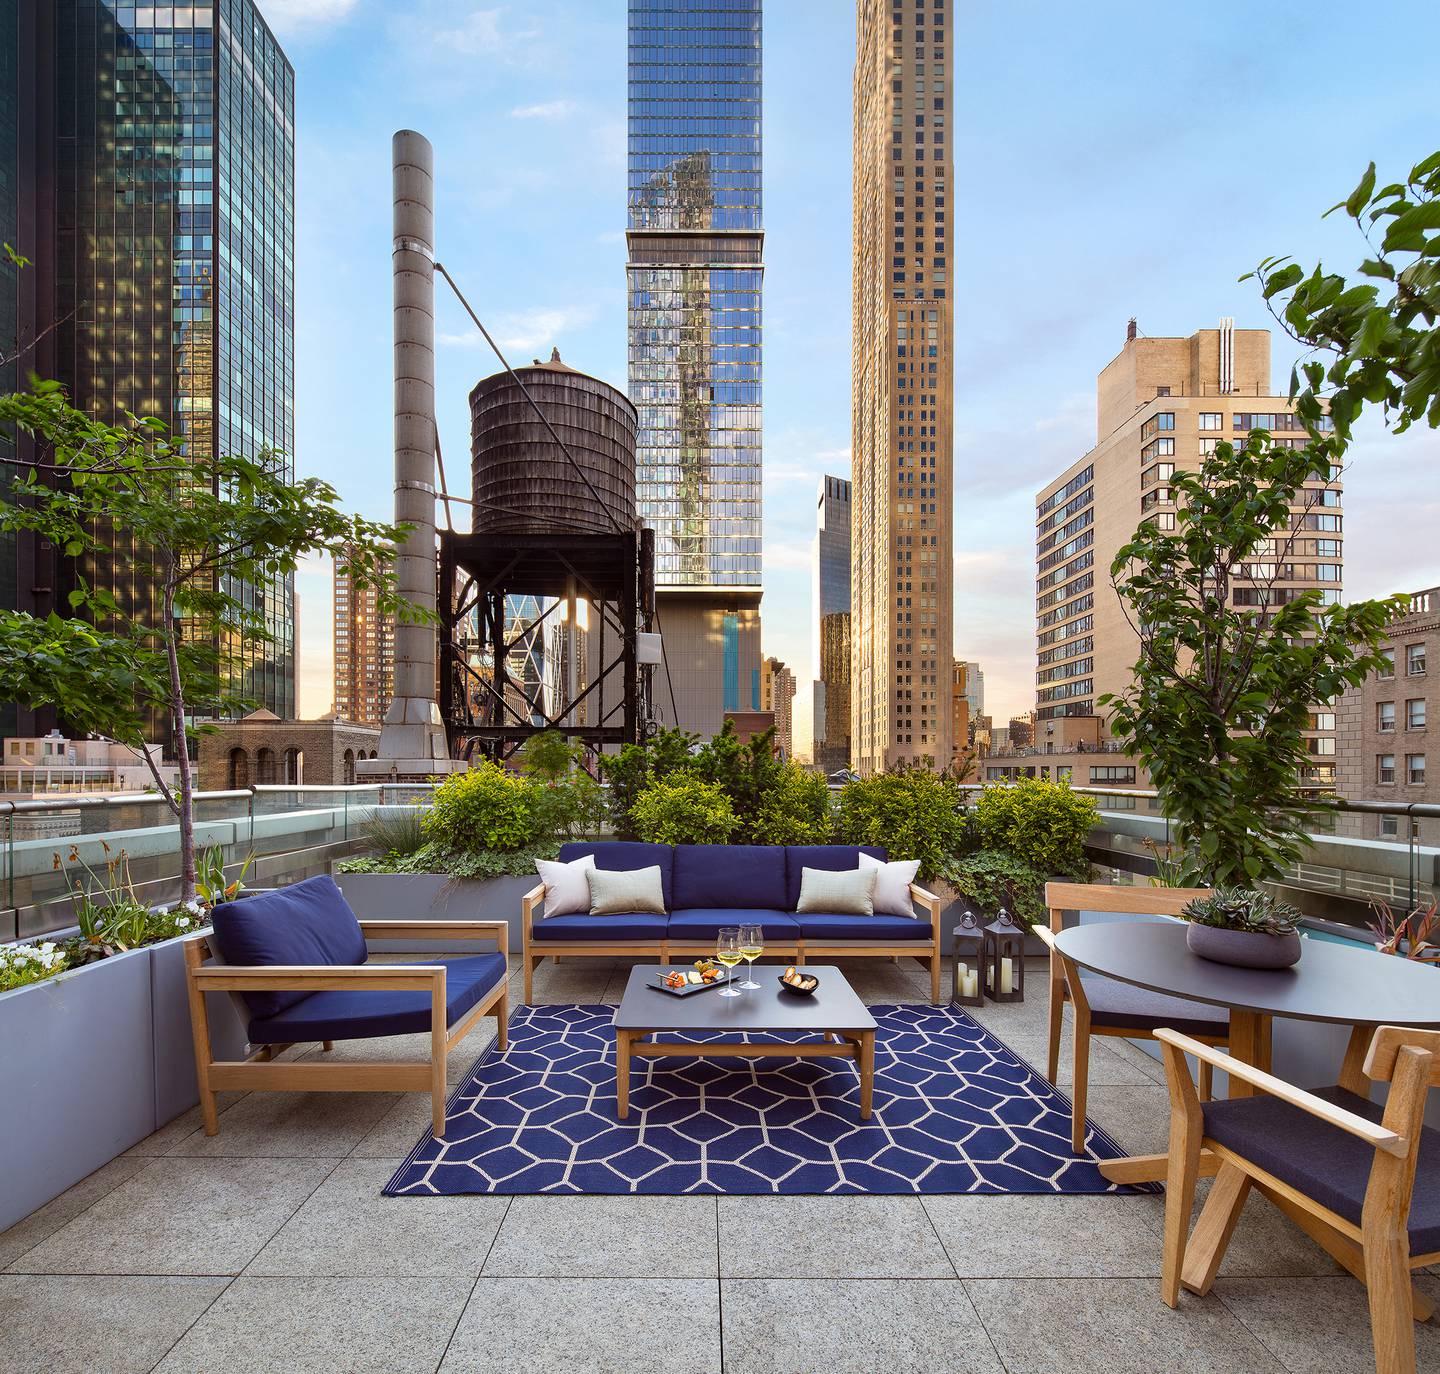 The In Residence package at the Park Hyatt in New York includes a 350-square-foot terrace with panoramic views over the city